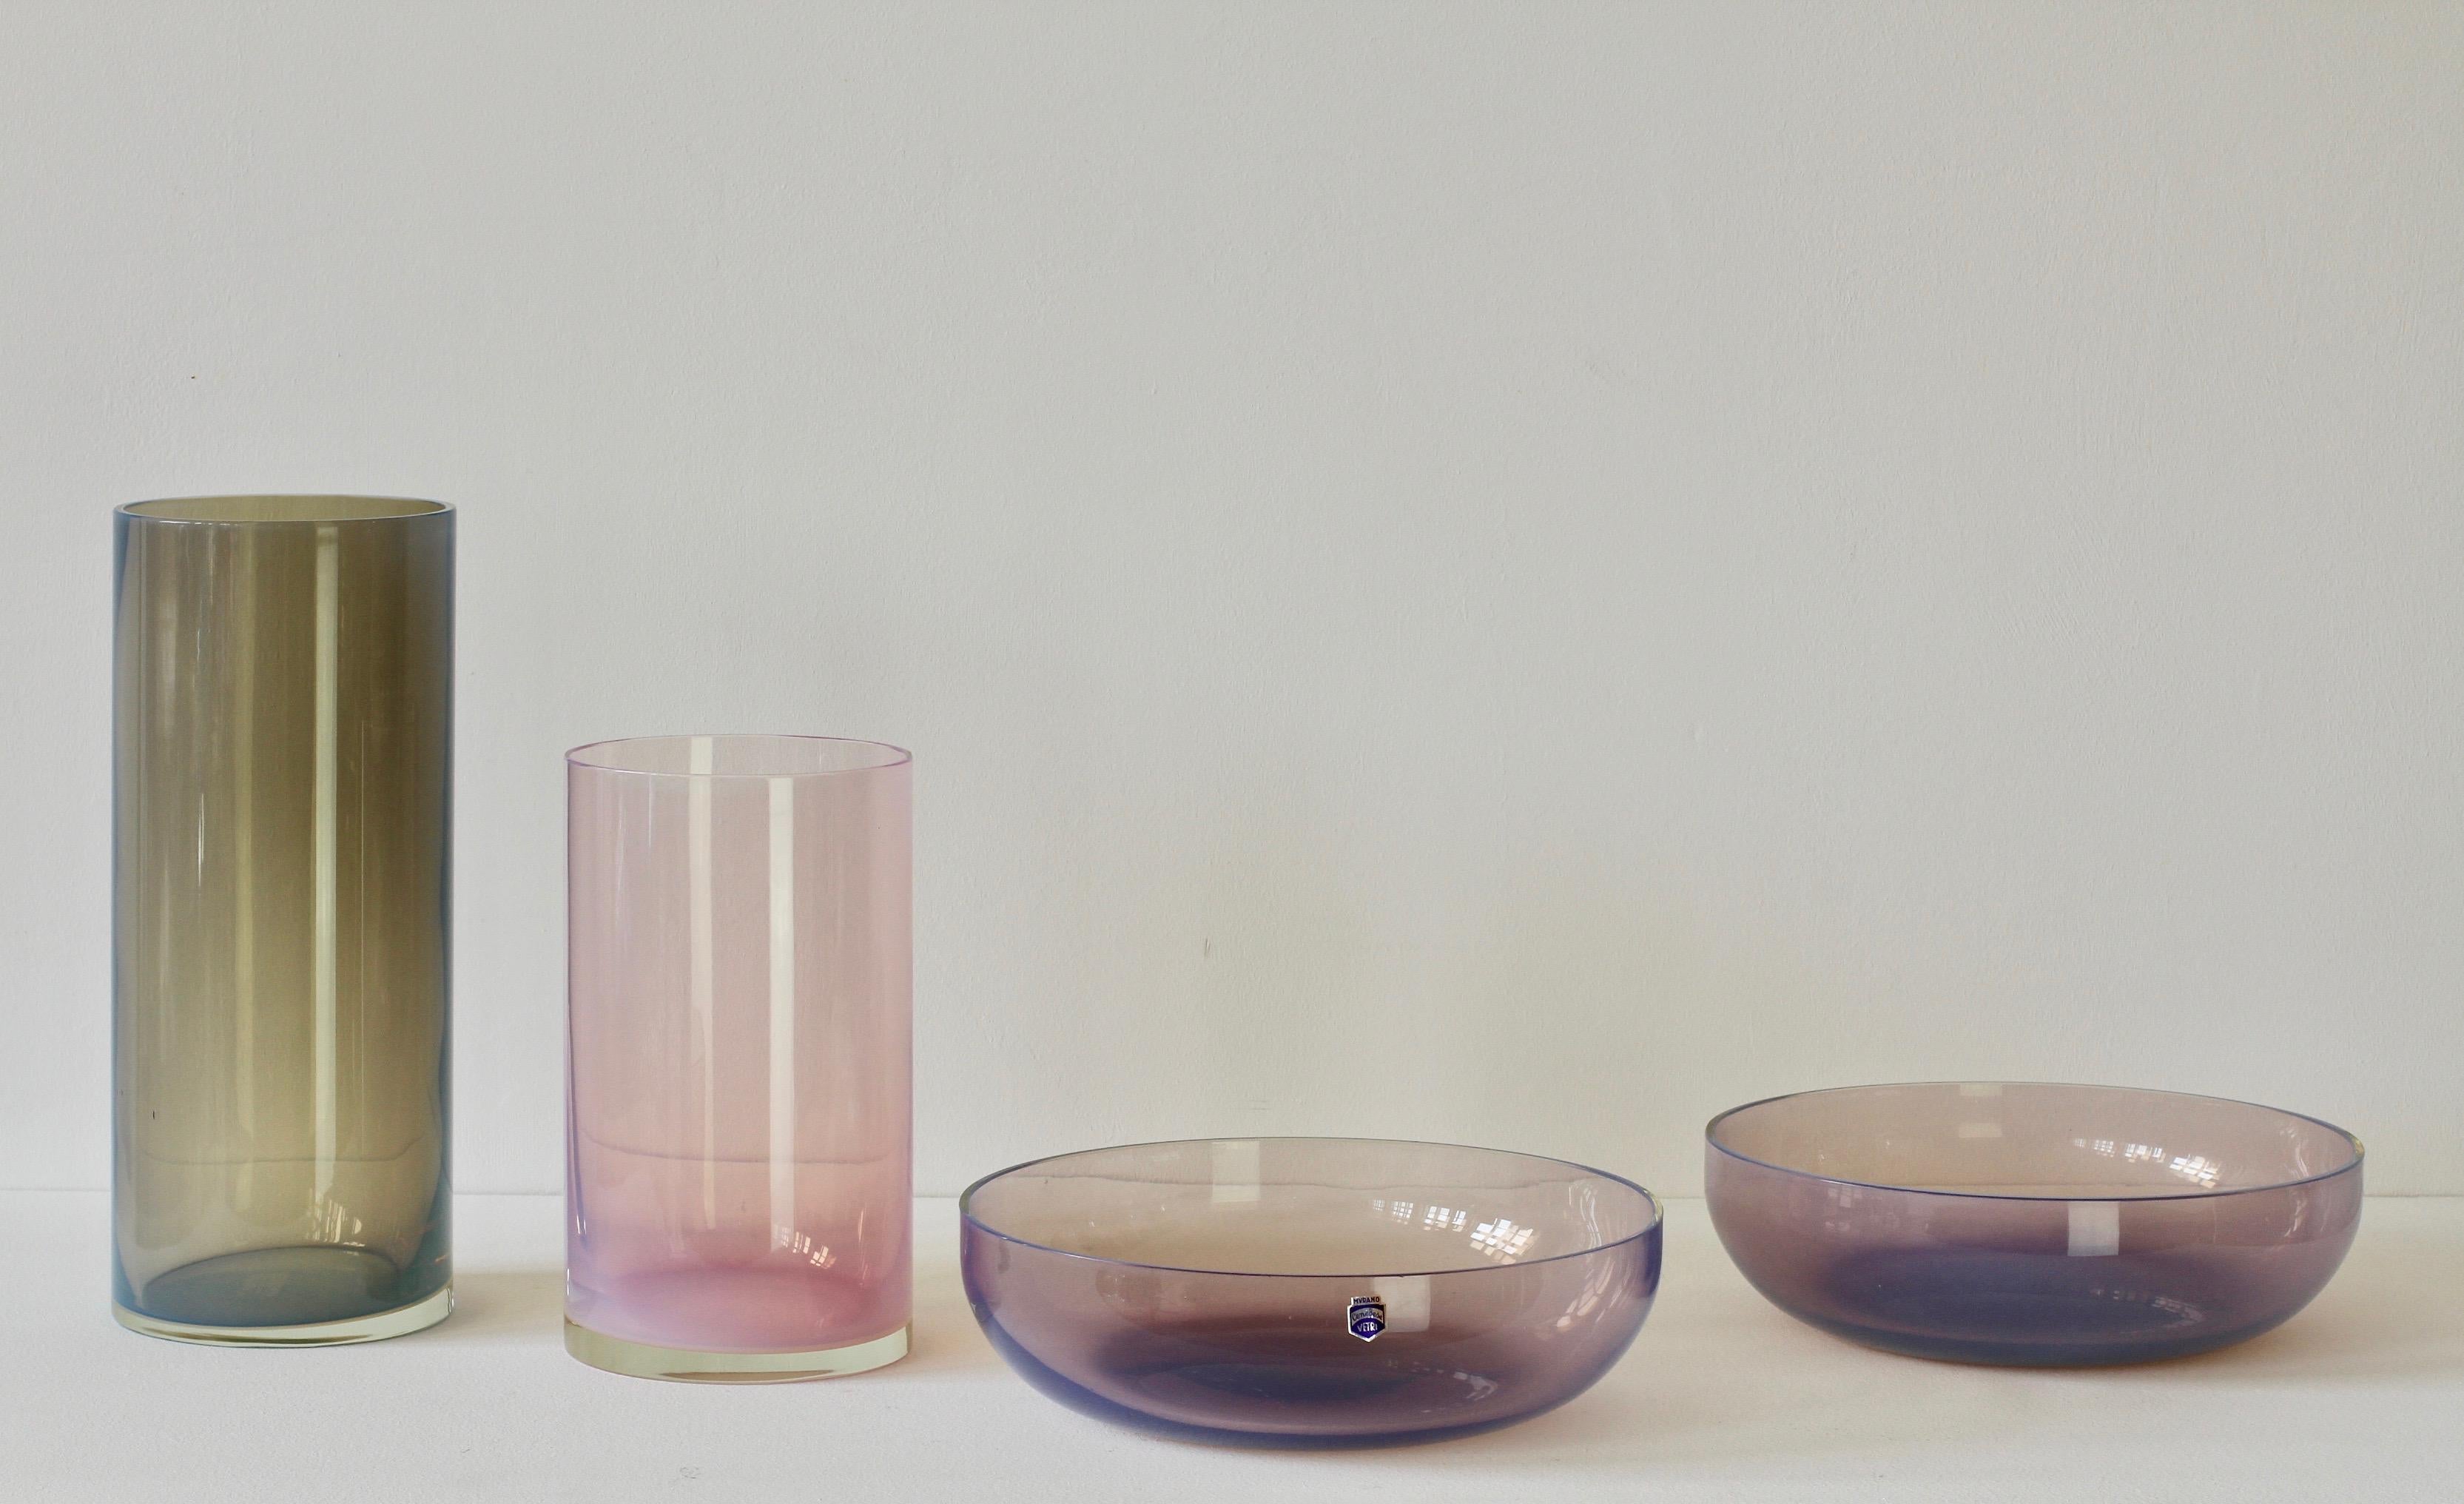 Rare set or ensemble of 'Opalino' Murano glass bowls, vases or vessels designed by Antonio da Ros (1936-2012) for Cenedese, circa 1970-1990. Wonderful translucent colors of vibrant pink, aubergine and moss green. Simplistic yet elegant forms -